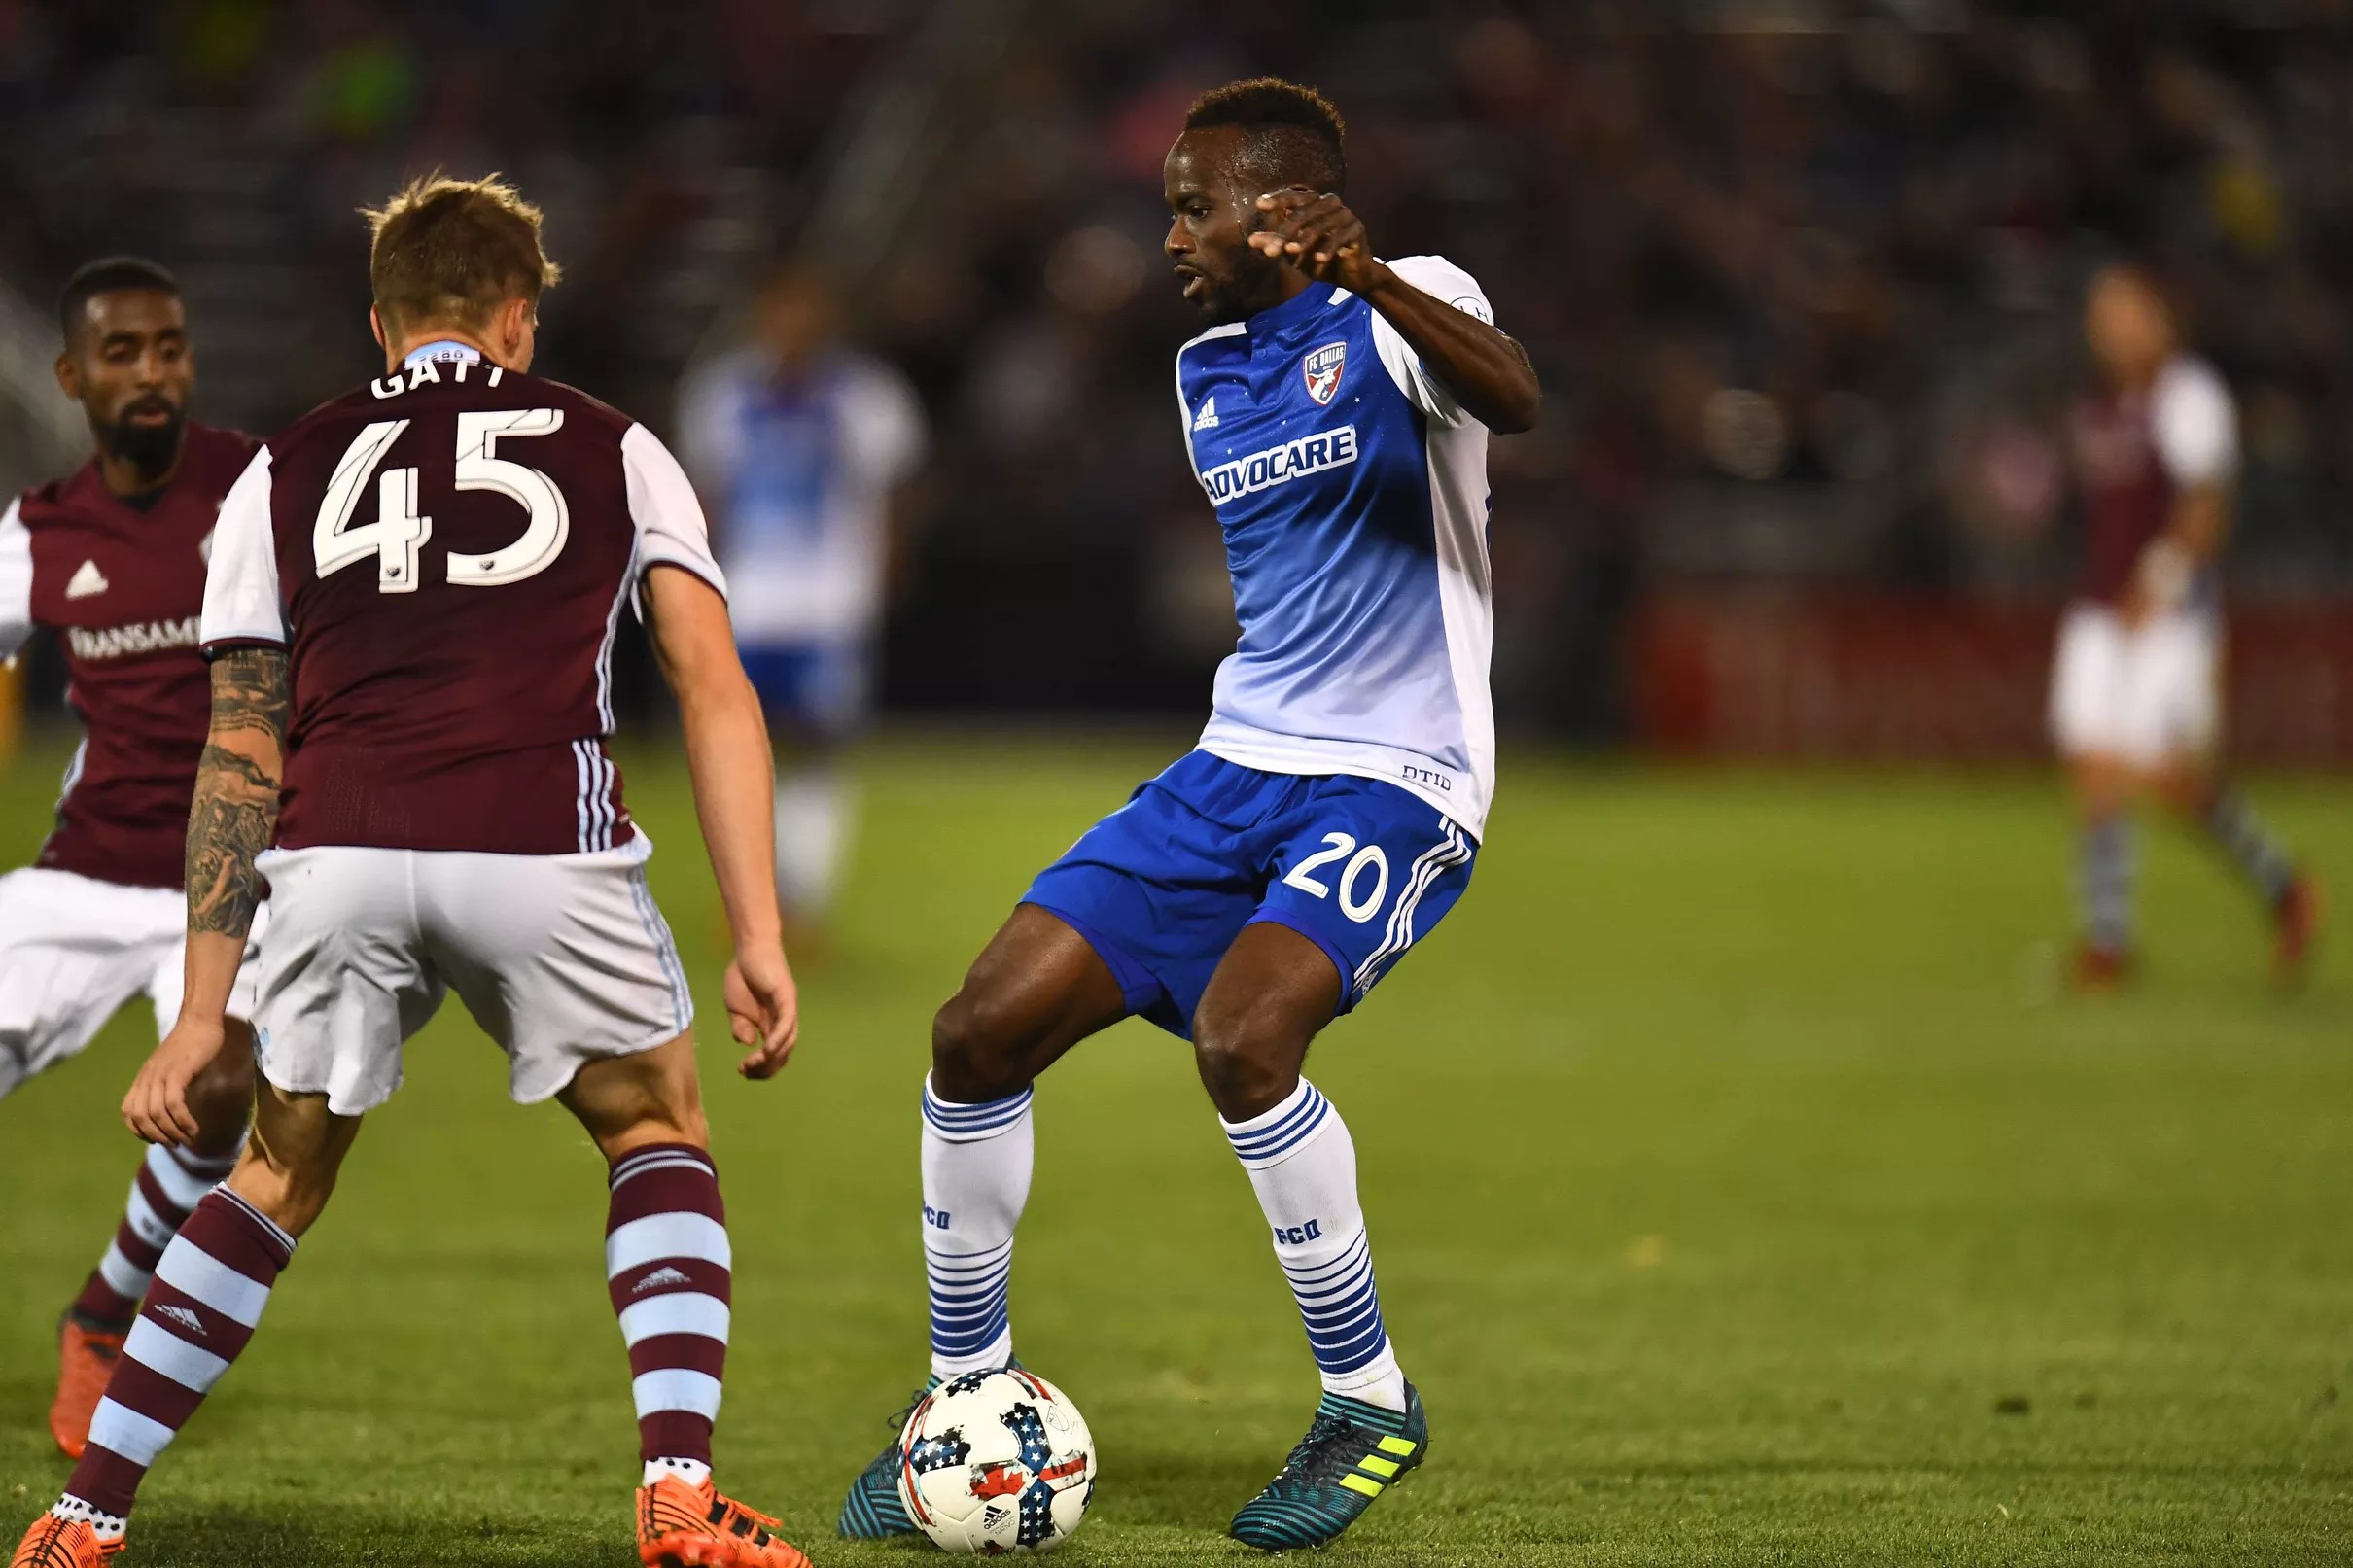 FC Dallas vs Colorado Rapids Preview, TV schedule and how to watch online